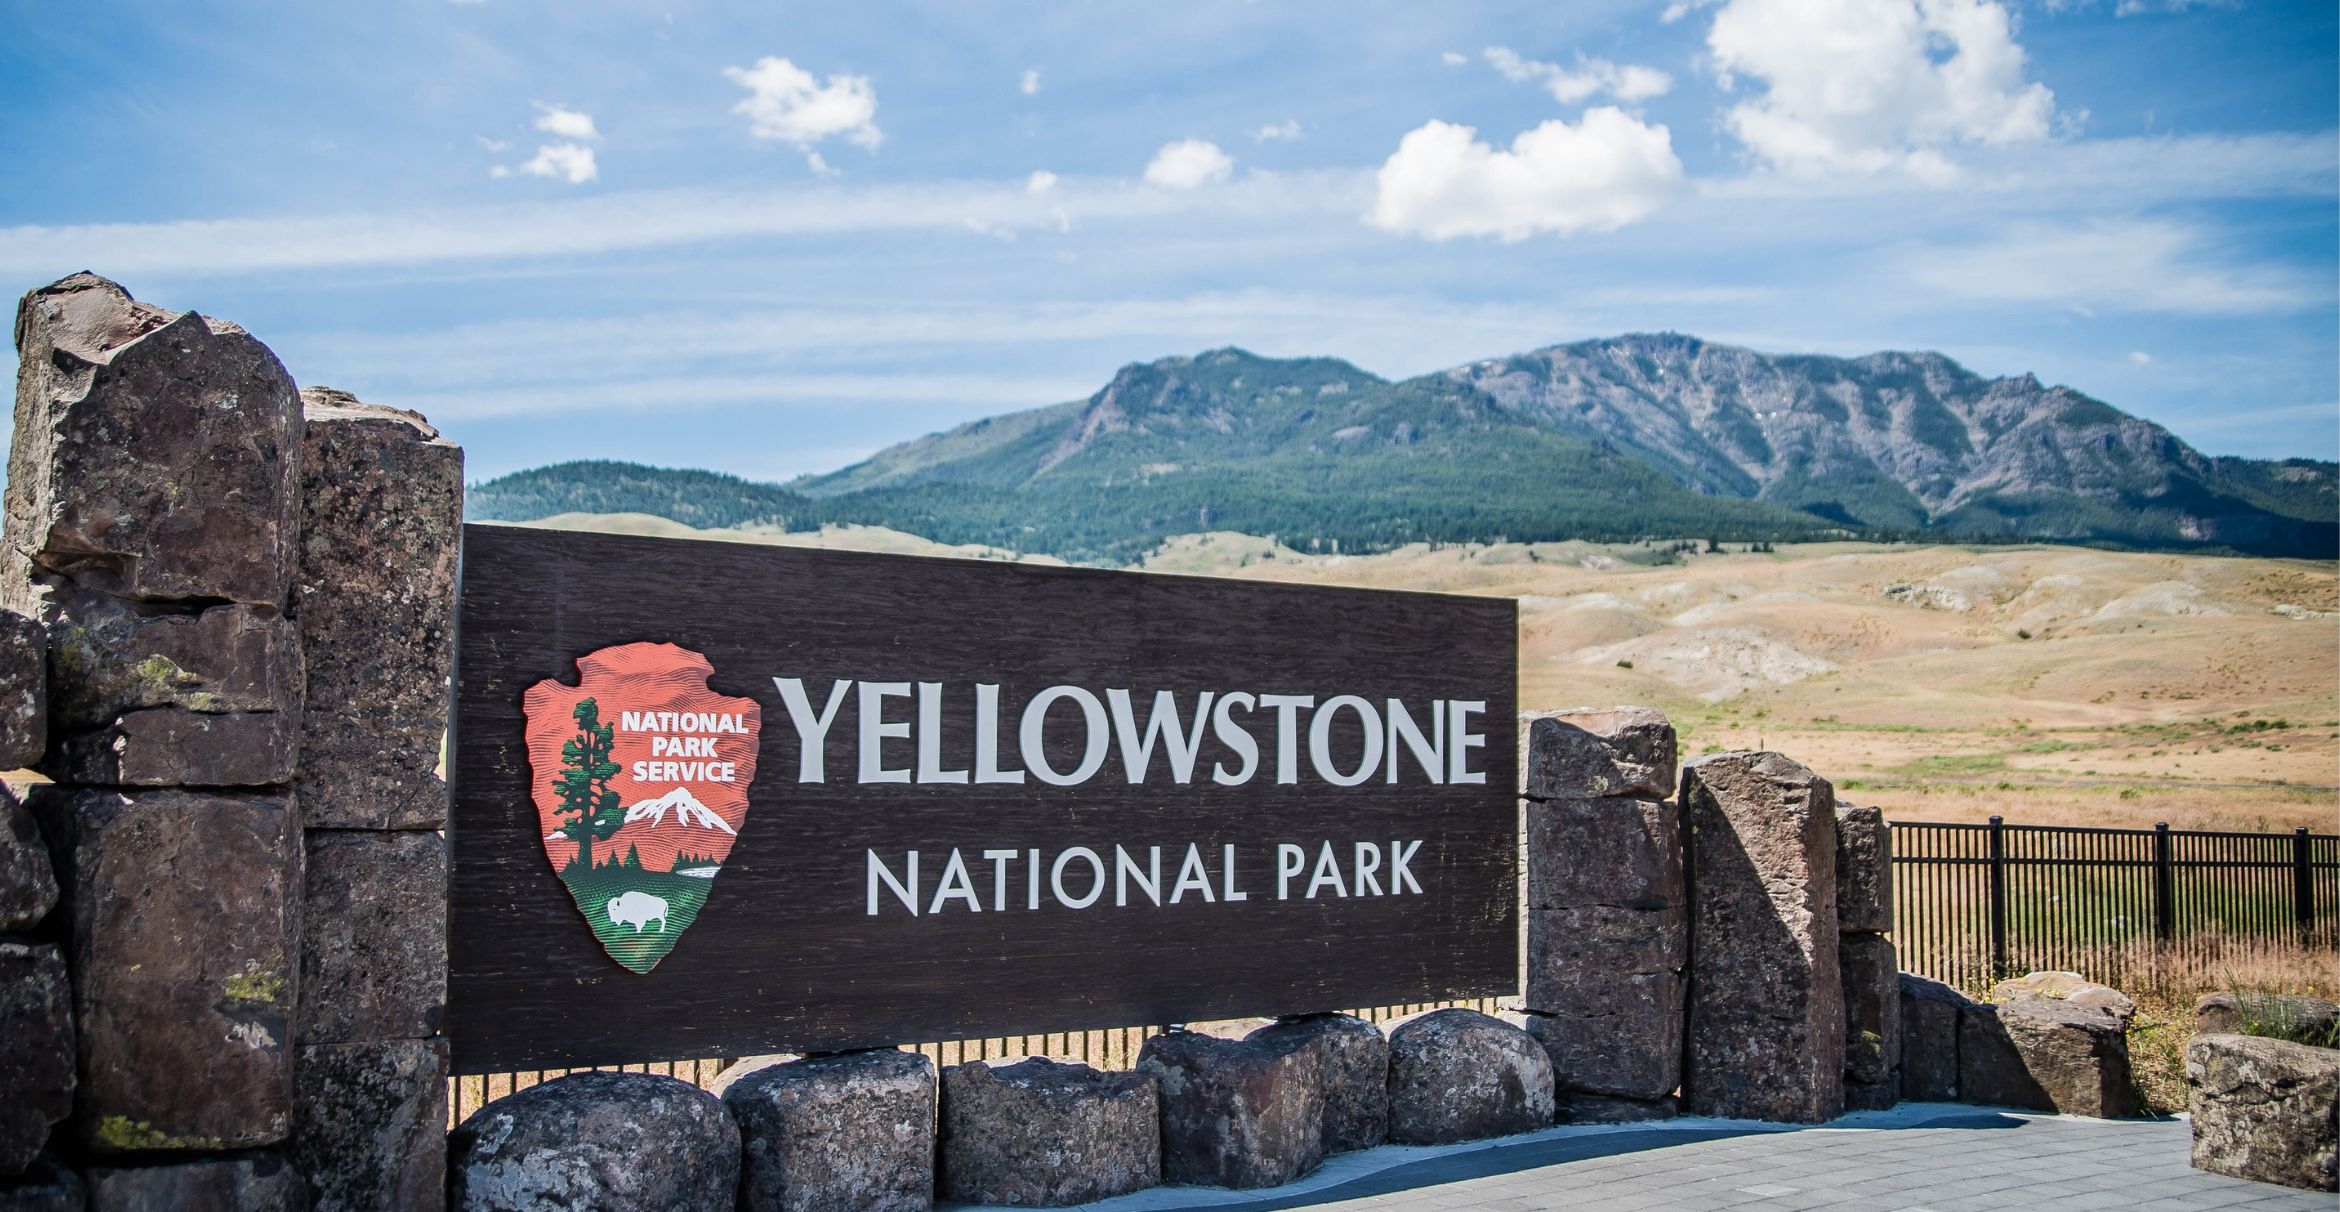 Yellowstone National Park sign with mountains in the background.